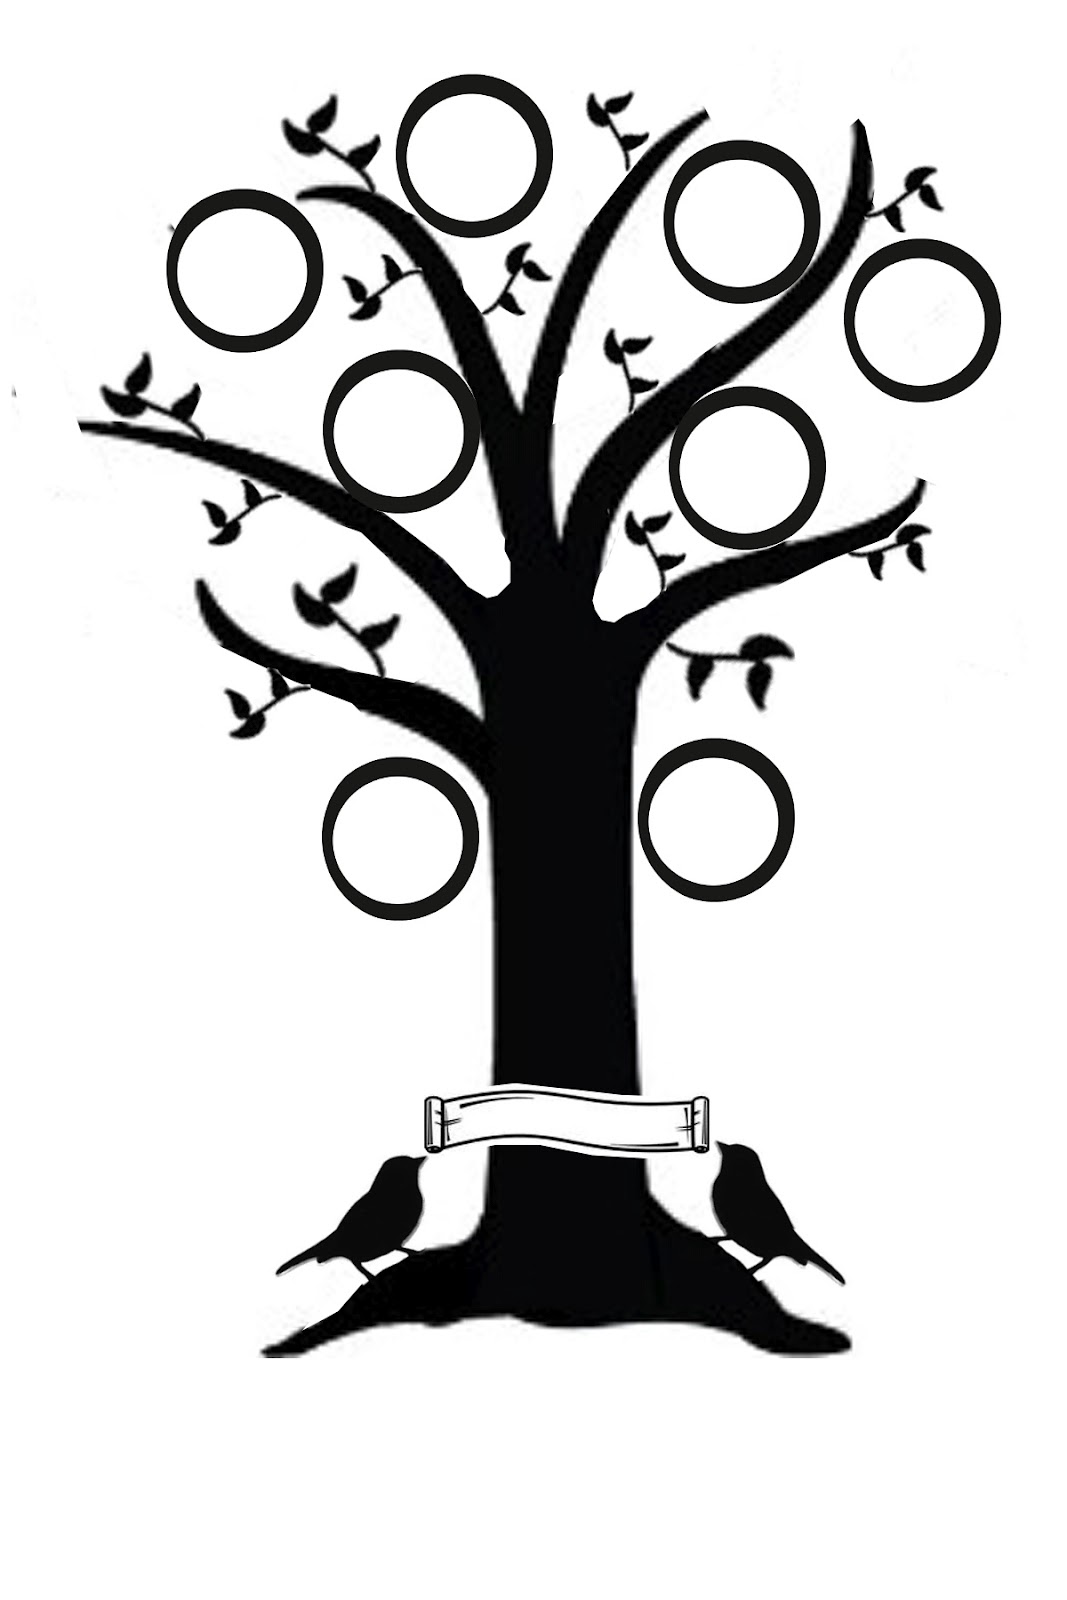 Simple Bare Tree Silhouette - ClipArt Best